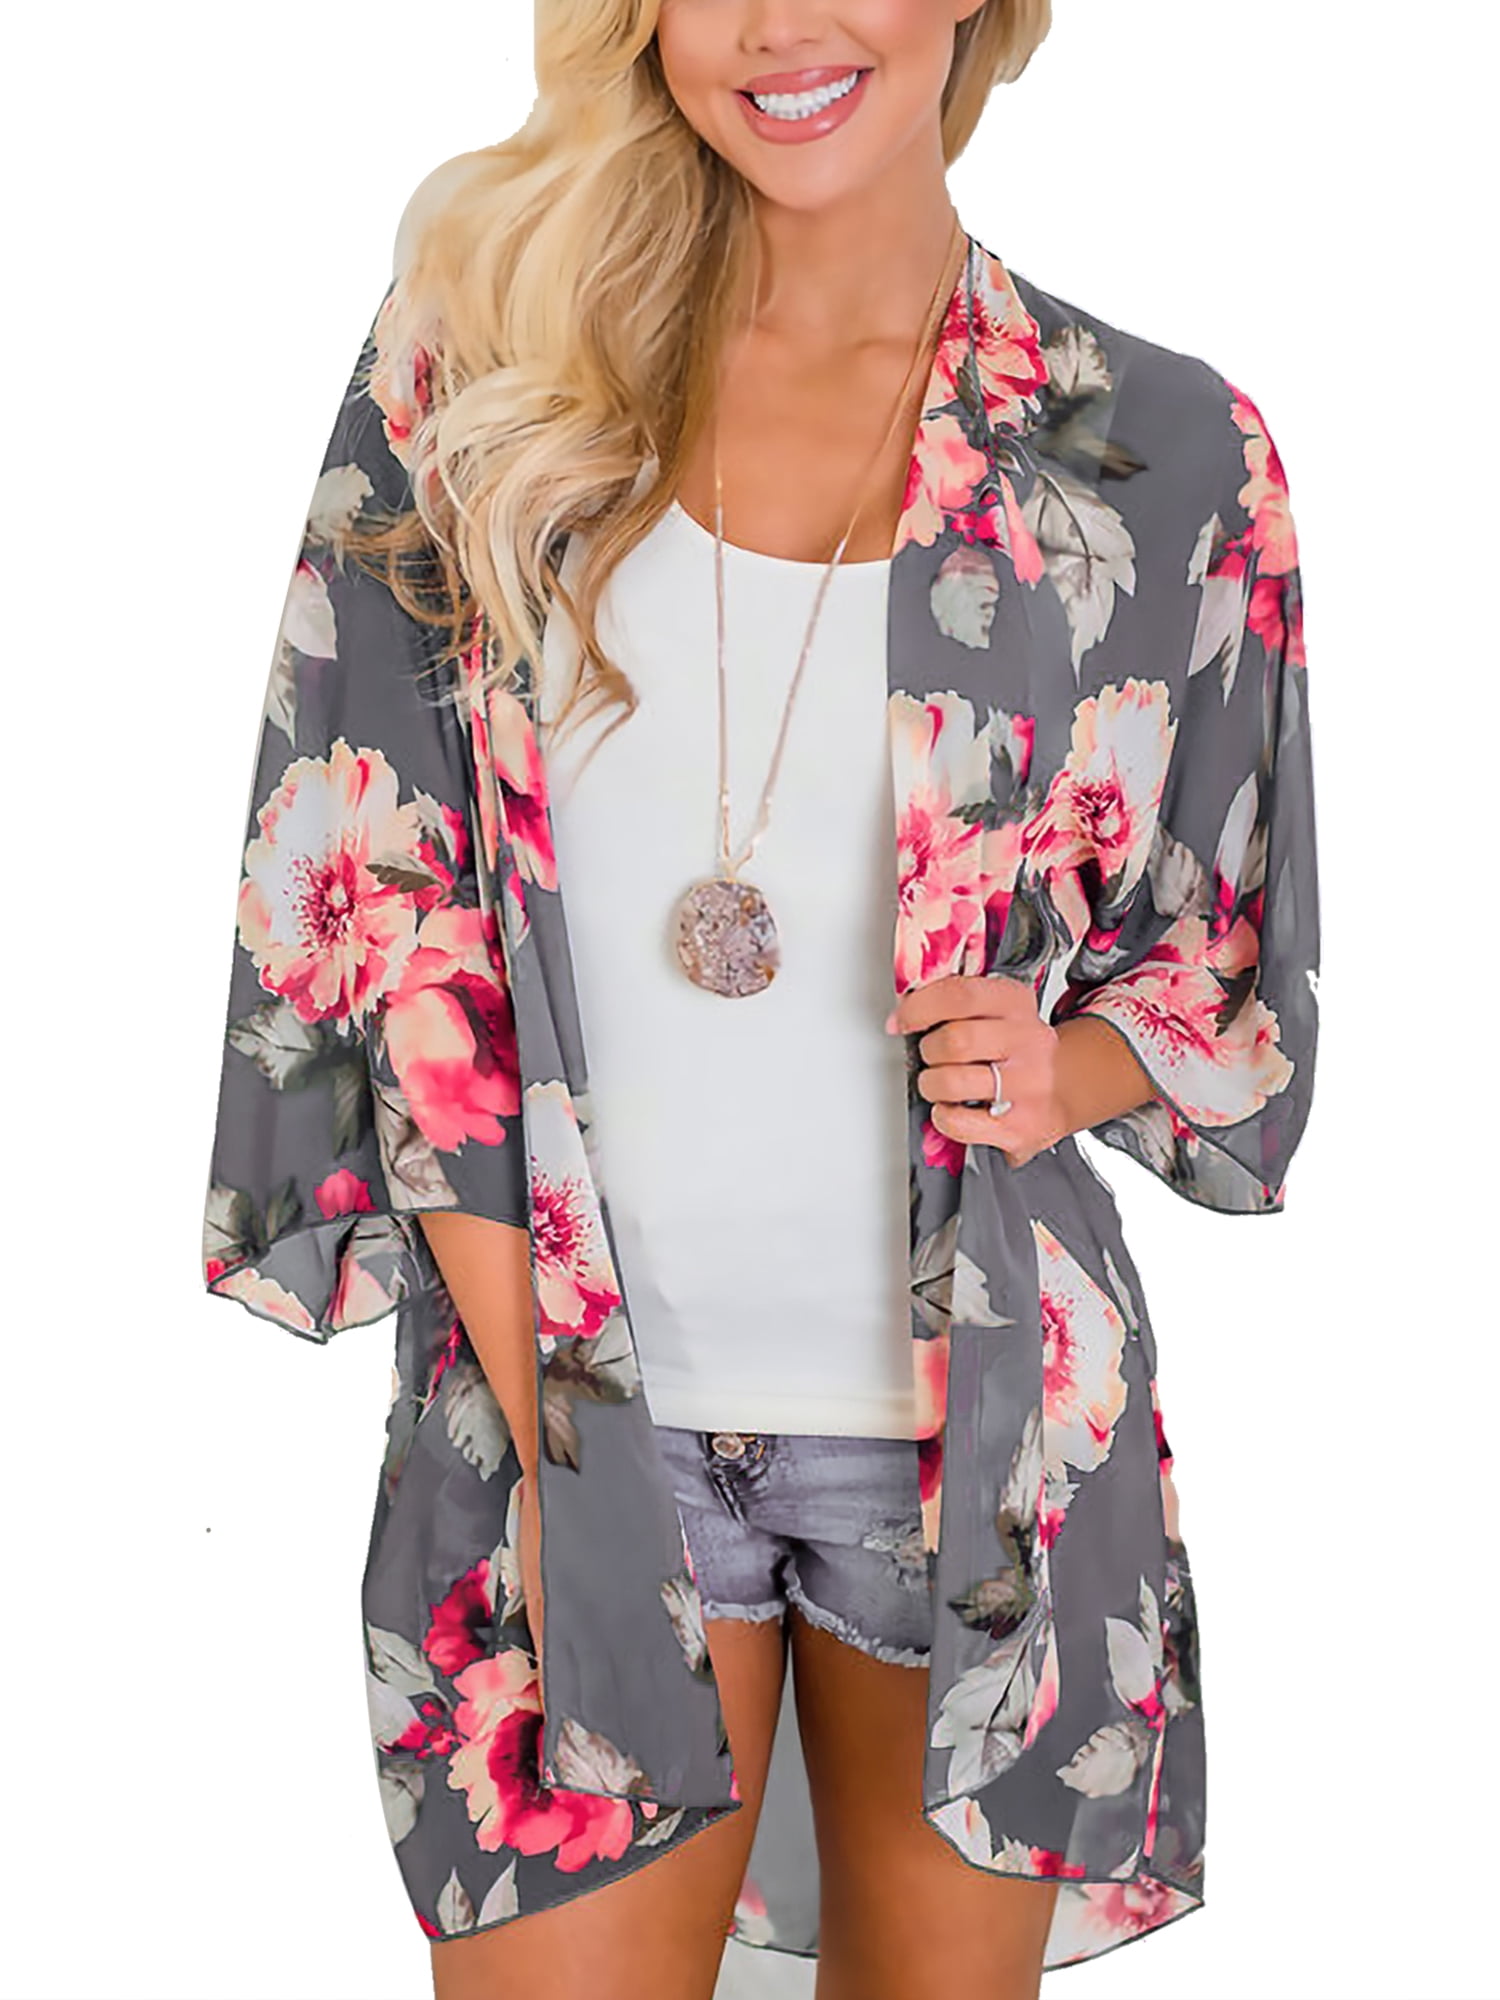 UK Femmes Floral Cardigan Femmes Manches 3/4 KIMONO Summer Beach Cover Up Top 8-26 